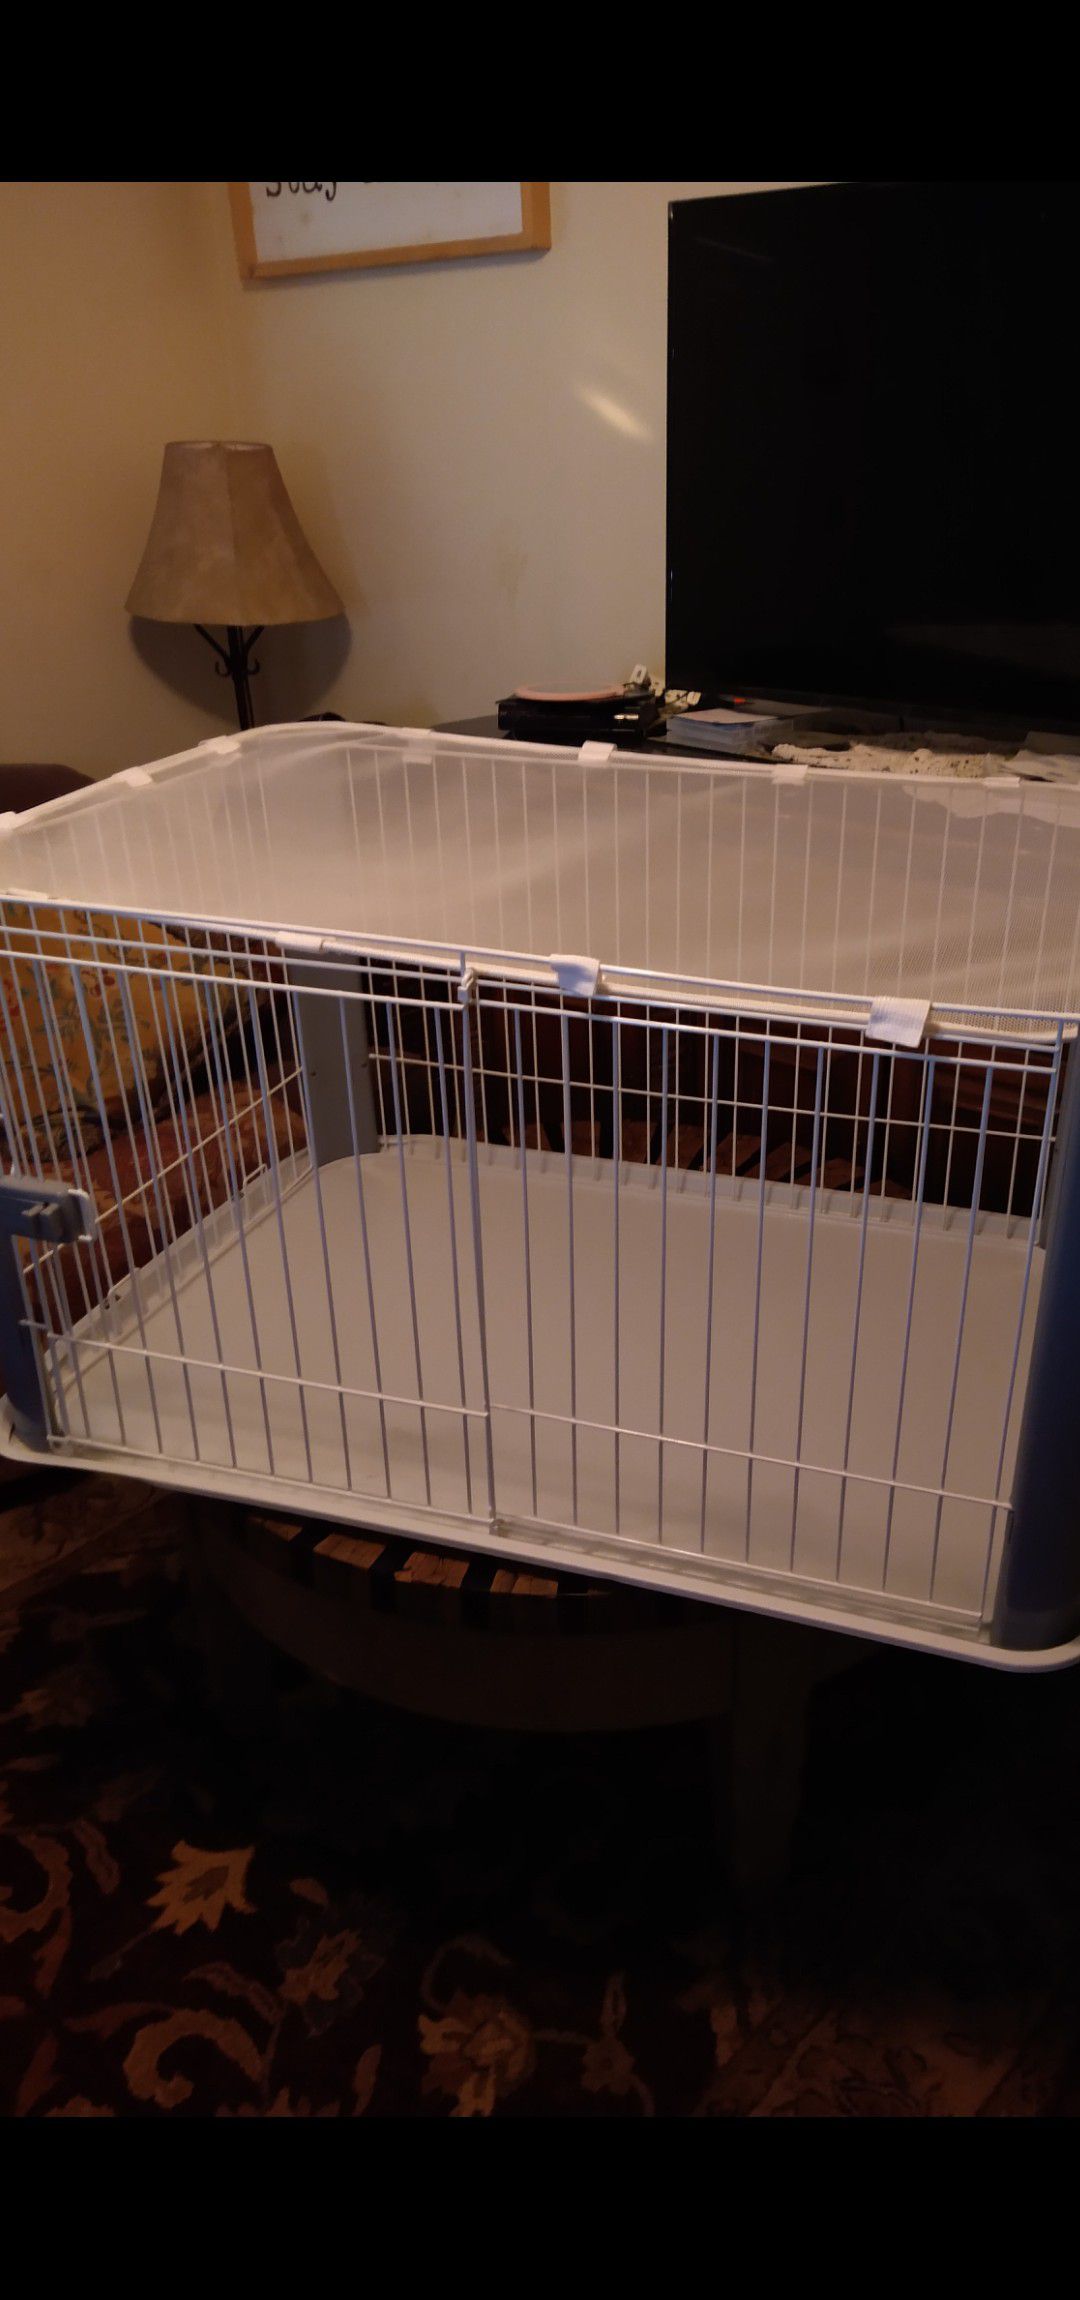 Dog Cage 2 1/2 wide by 3 1/2 long 2 1/2 high asking $60 obo